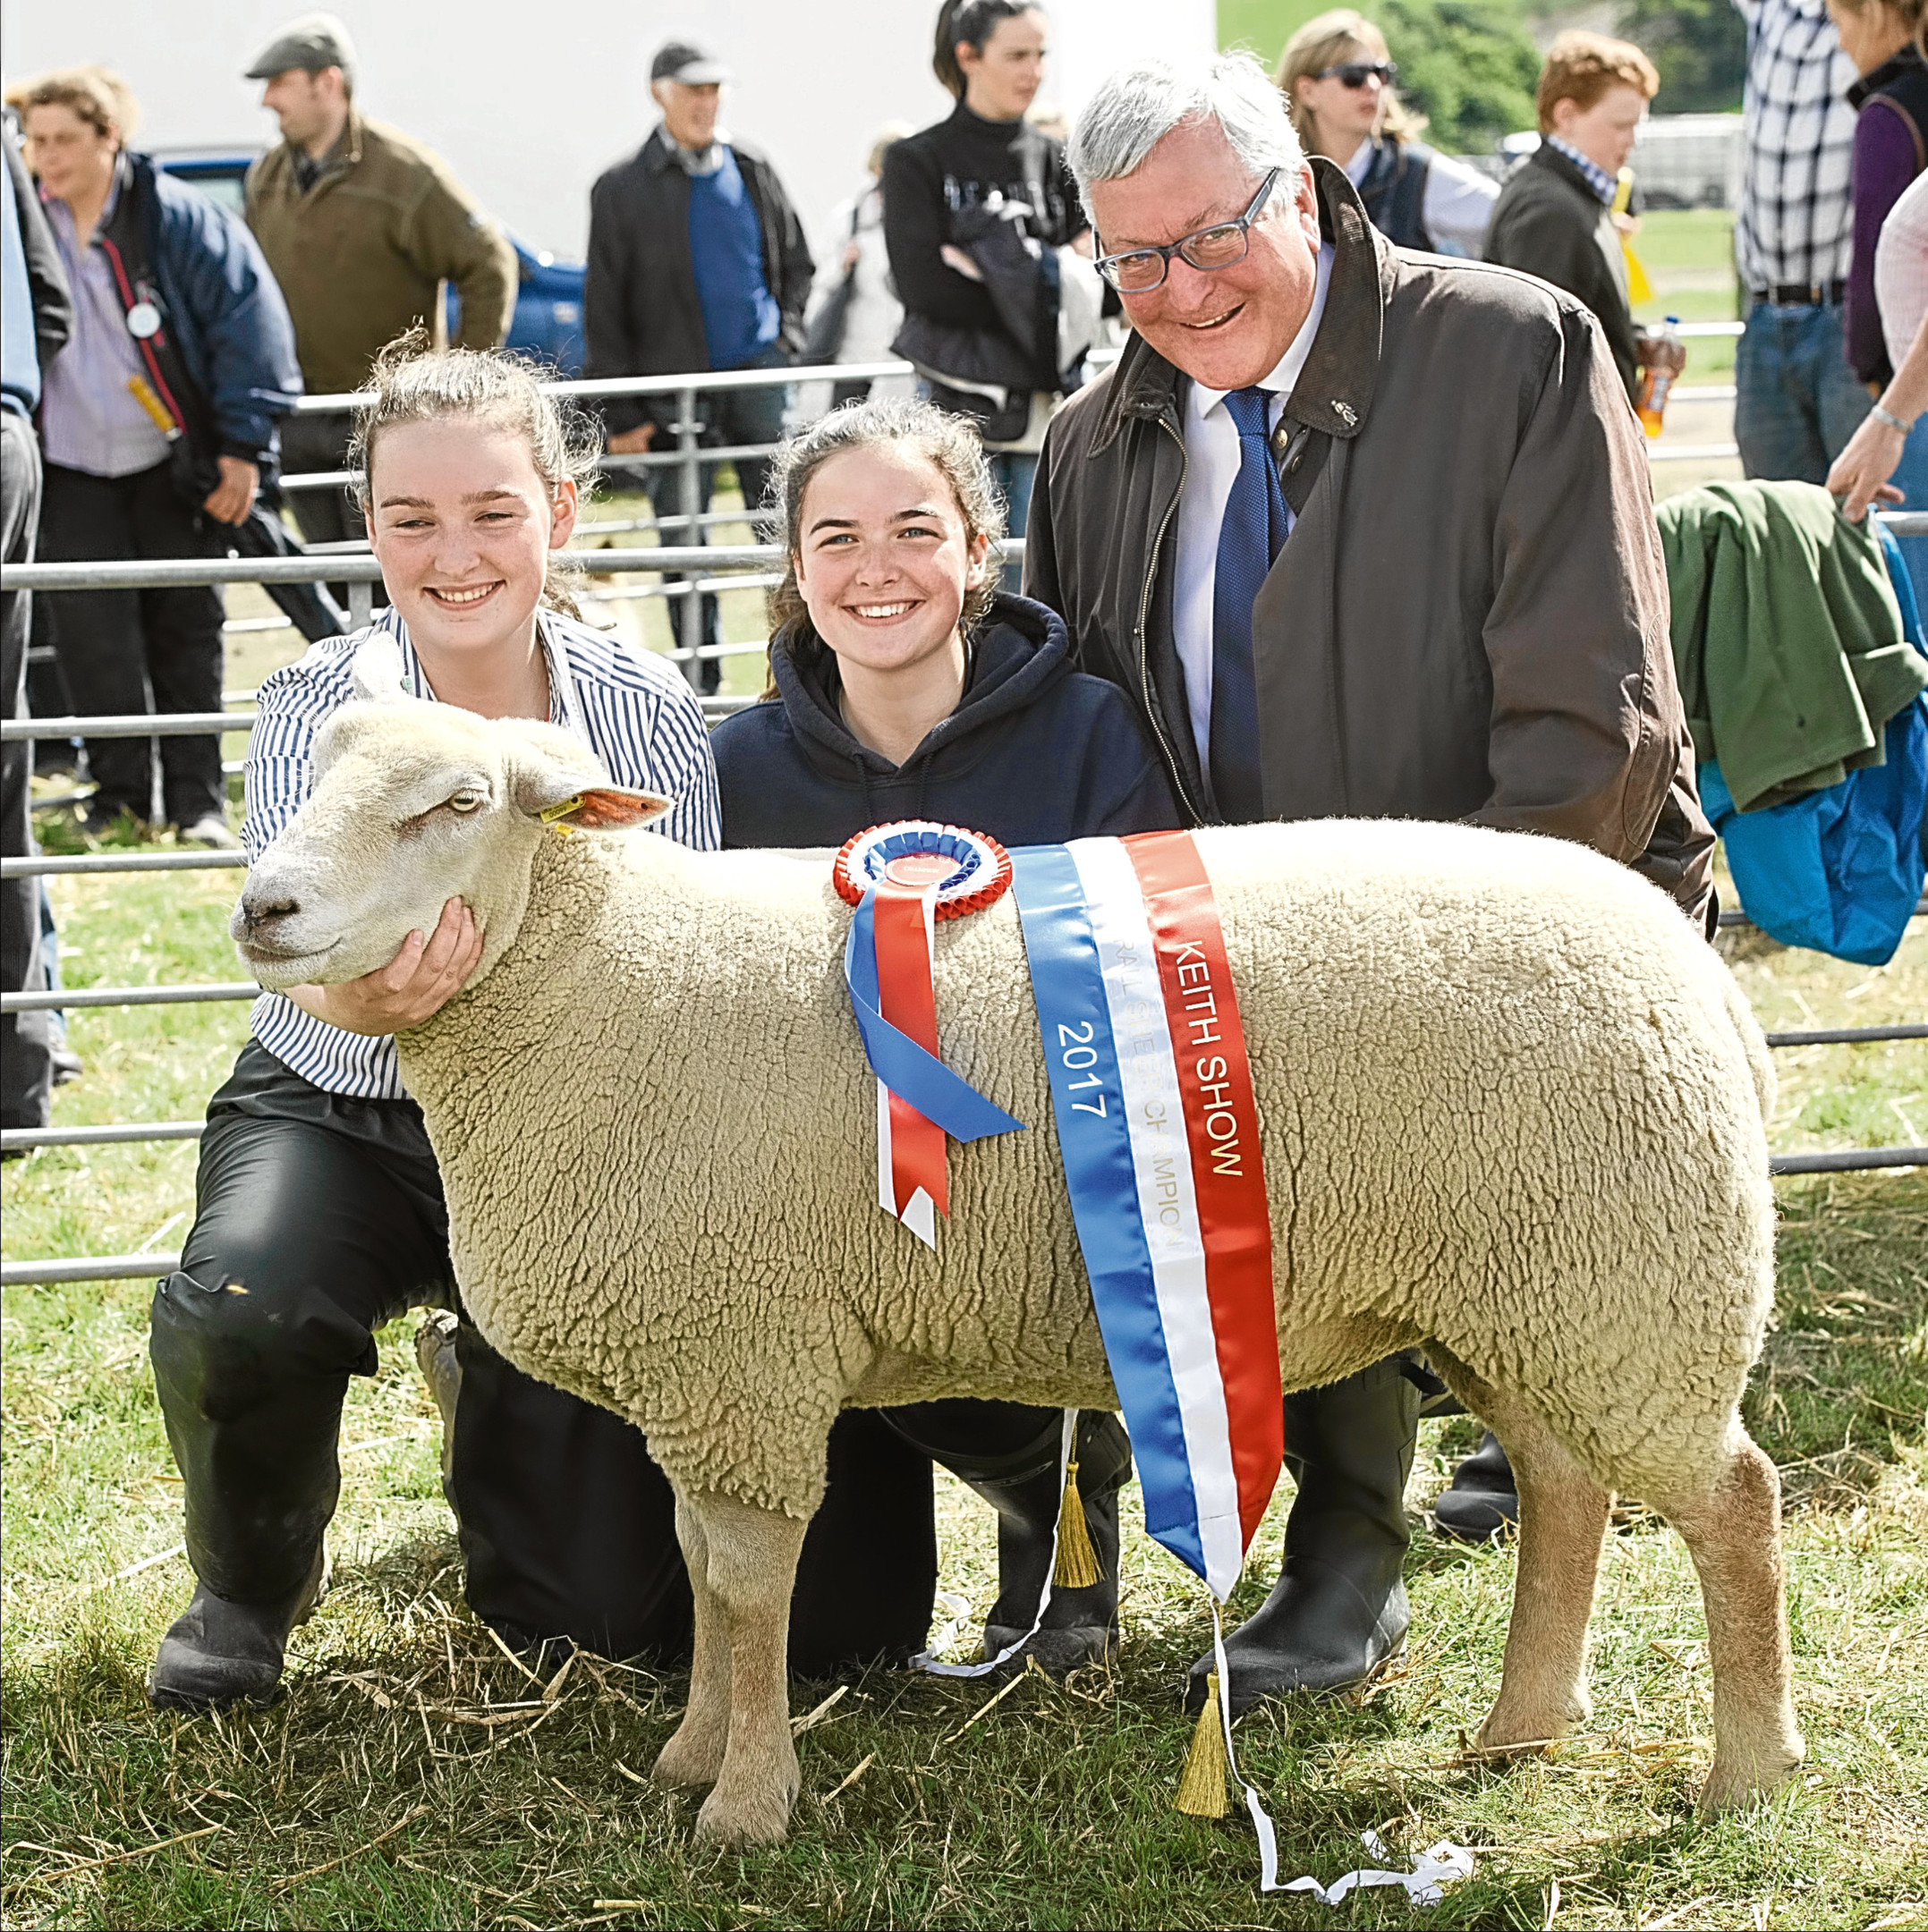 Rural Economy Secretary Fergus Ewing presents Erin and Eilidh Duncan with the sheep interbreed championship rosette.